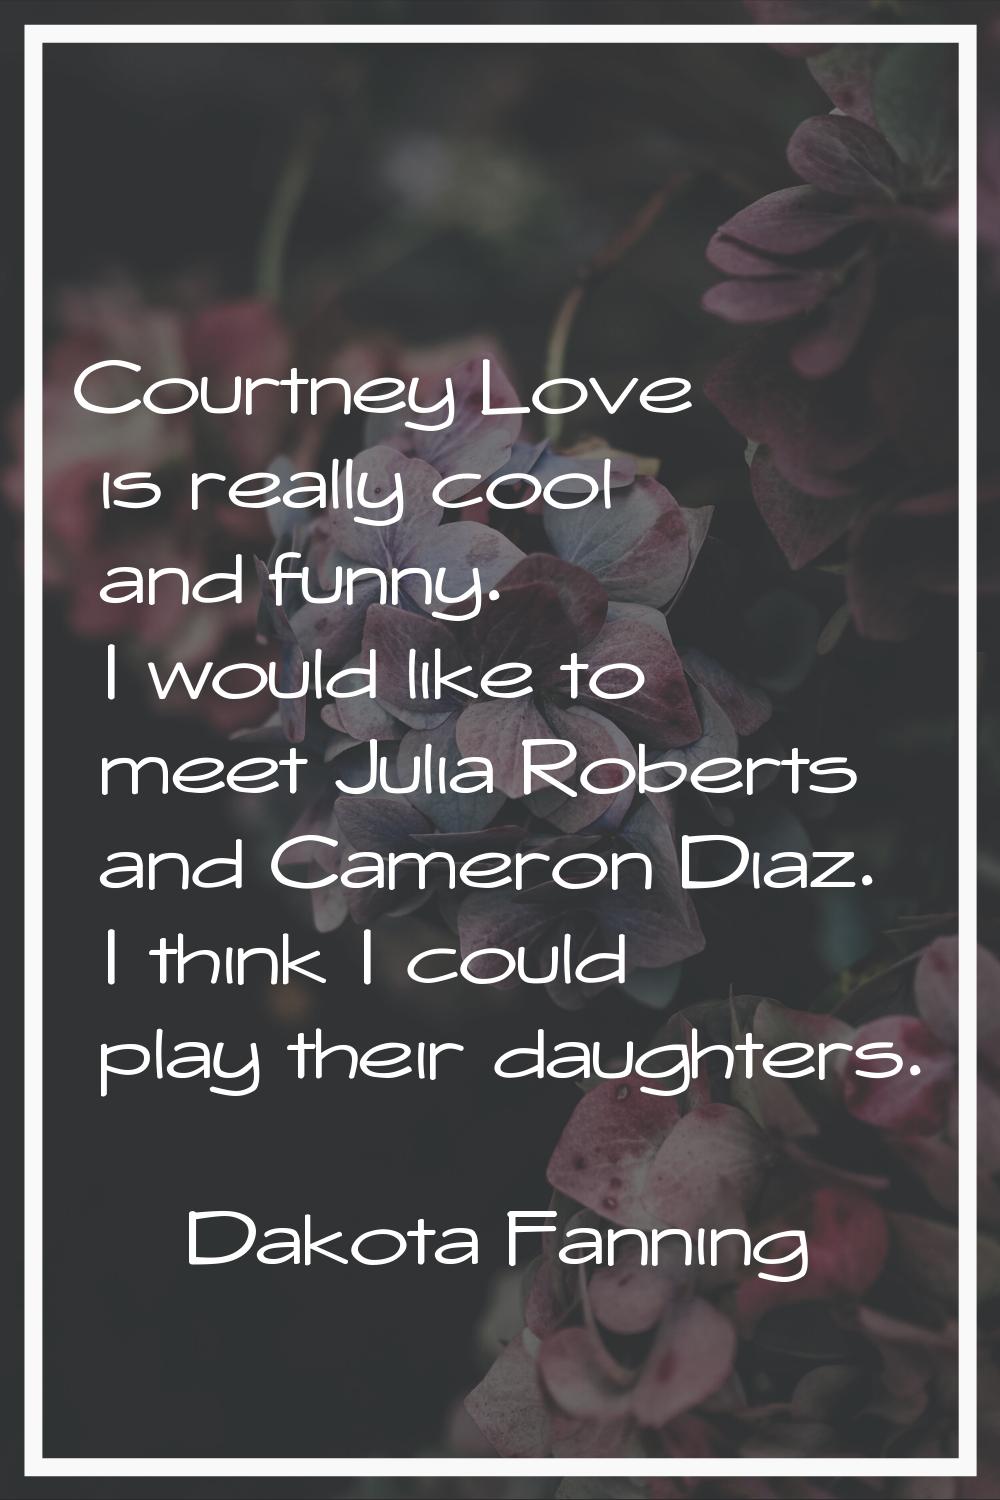 Courtney Love is really cool and funny. I would like to meet Julia Roberts and Cameron Diaz. I thin